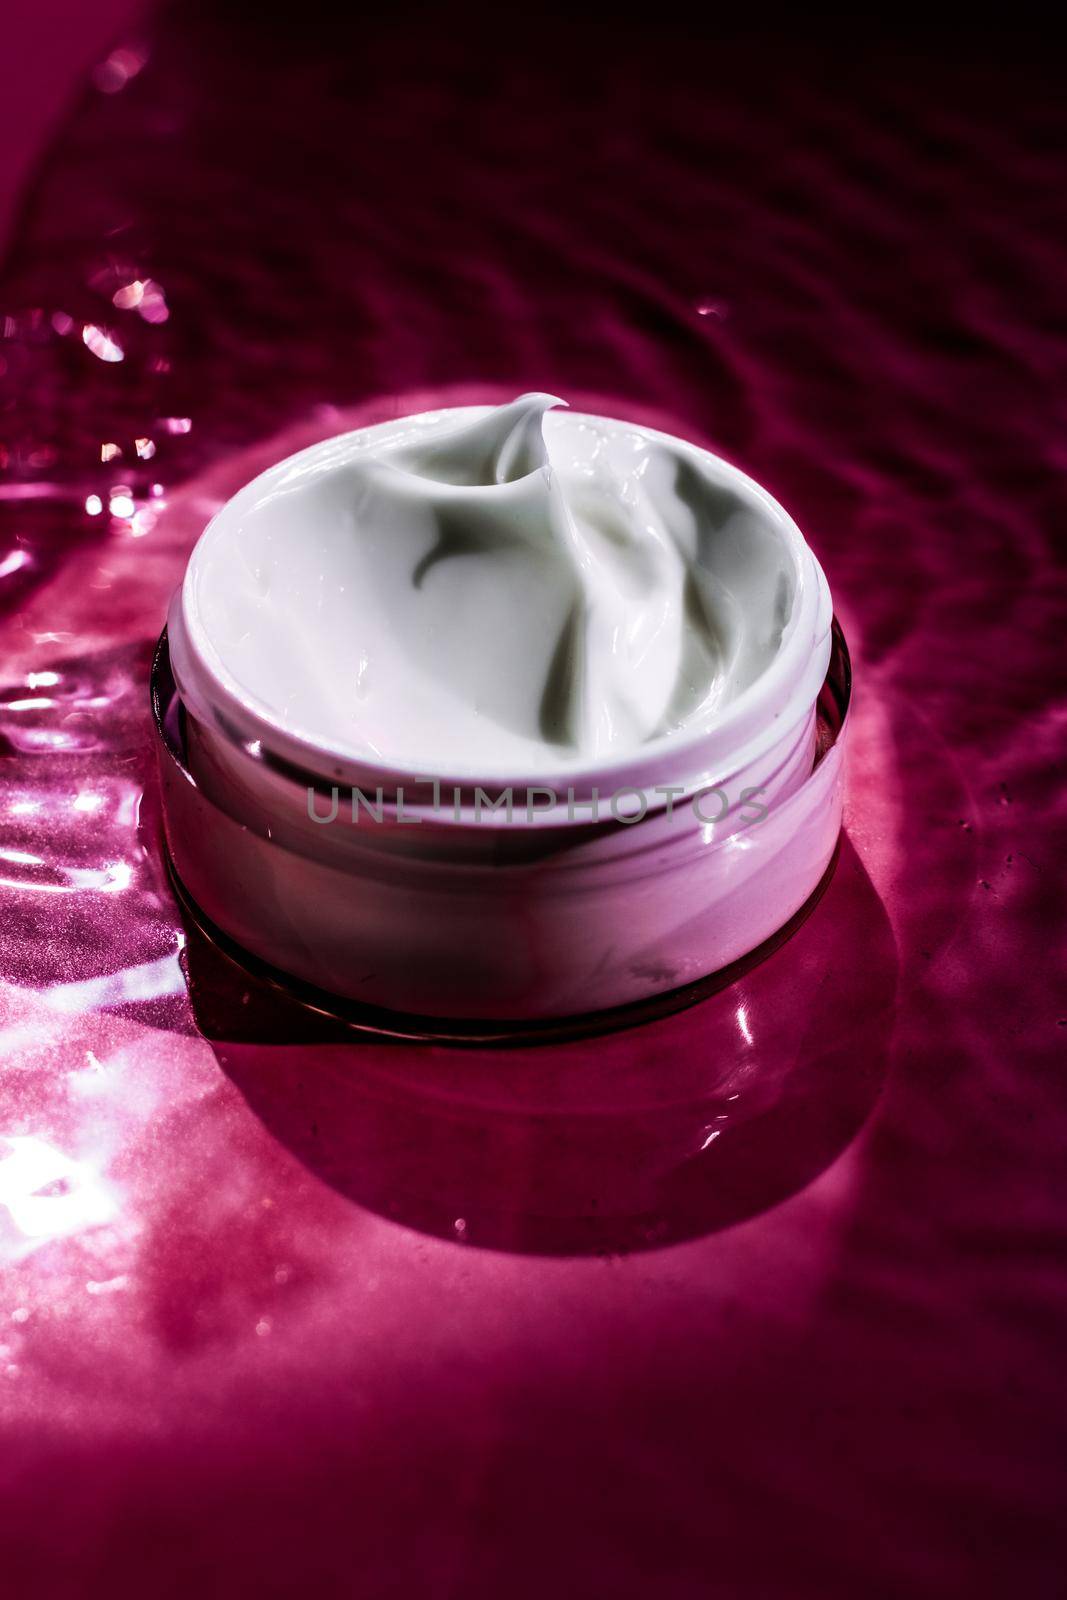 beauty cream, luxury cosmetic product - skin and body care styled concept